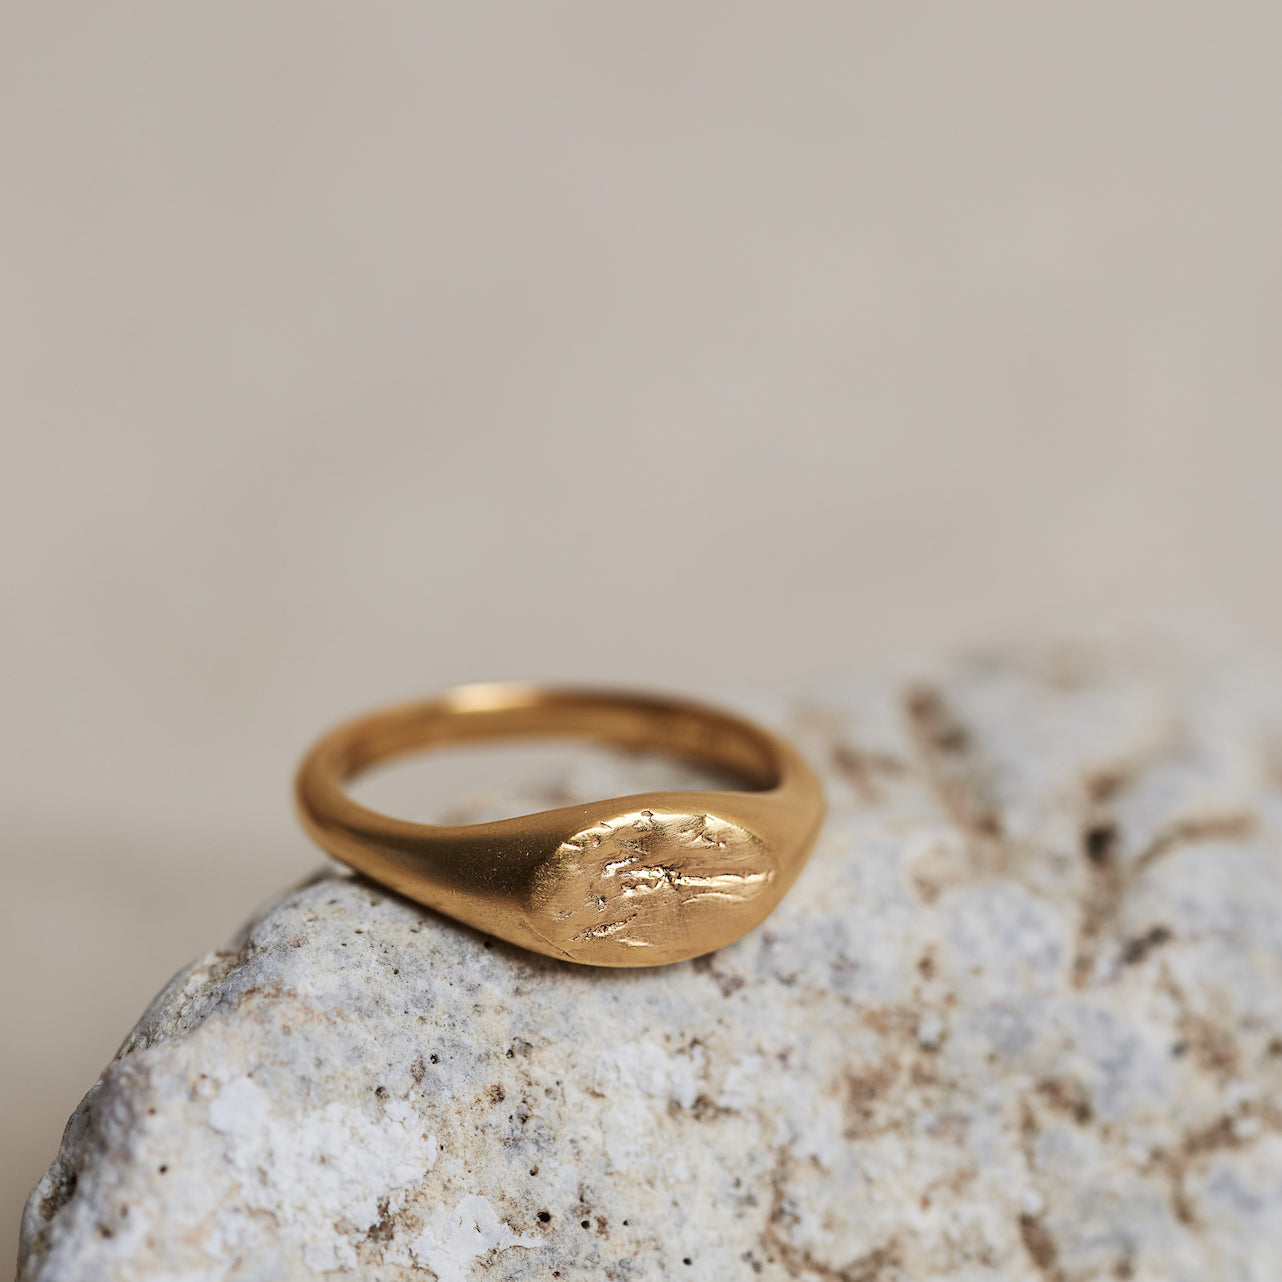 Designed by Megan Collins, the Unity Signet ring is a reminder to create balance between your role within your community and your own flavour of individuality.